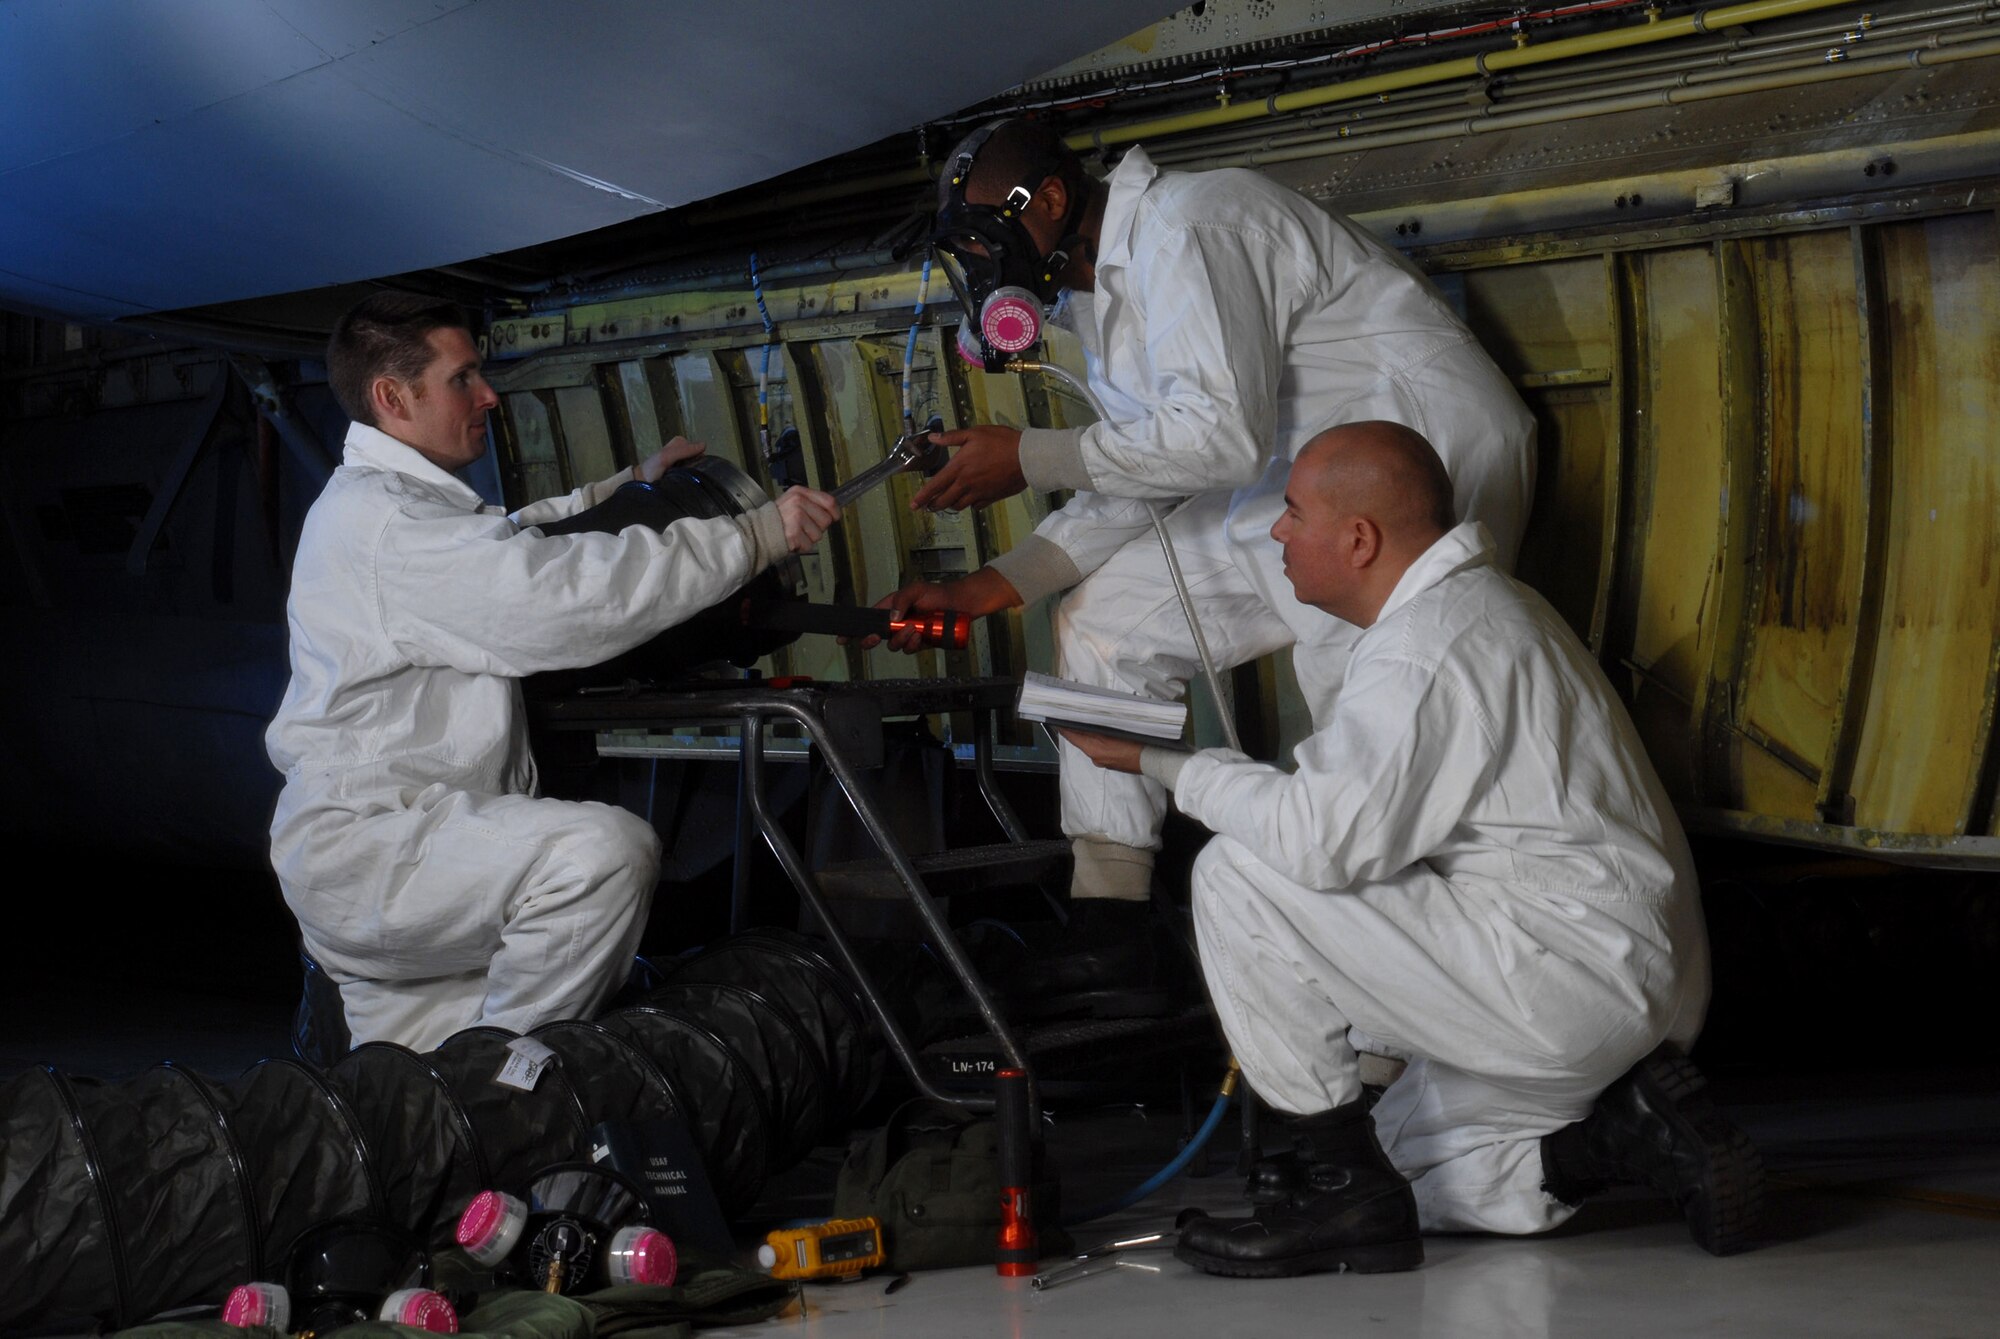 Senior Airman David Skannal, wearing a full-face supplied air respirator (center), receives a wrench from Staff Sgt. Ryan Slanina (left) while Tech. Sgt. Tim Burrola looks on before inspecting the interior of the center wing fuel tank of a KC-135 Stratotanker Jan. 9 at March Air Reserve Base, Calif. Airman Skanalla is wearing the respirator so he could breathe properly while troubleshooting inside the fuel tank for leaks. All three are fuel cell technicians from the 452nd Maintenance Squadron. (U.S. Air Force photo/Val Gempis)